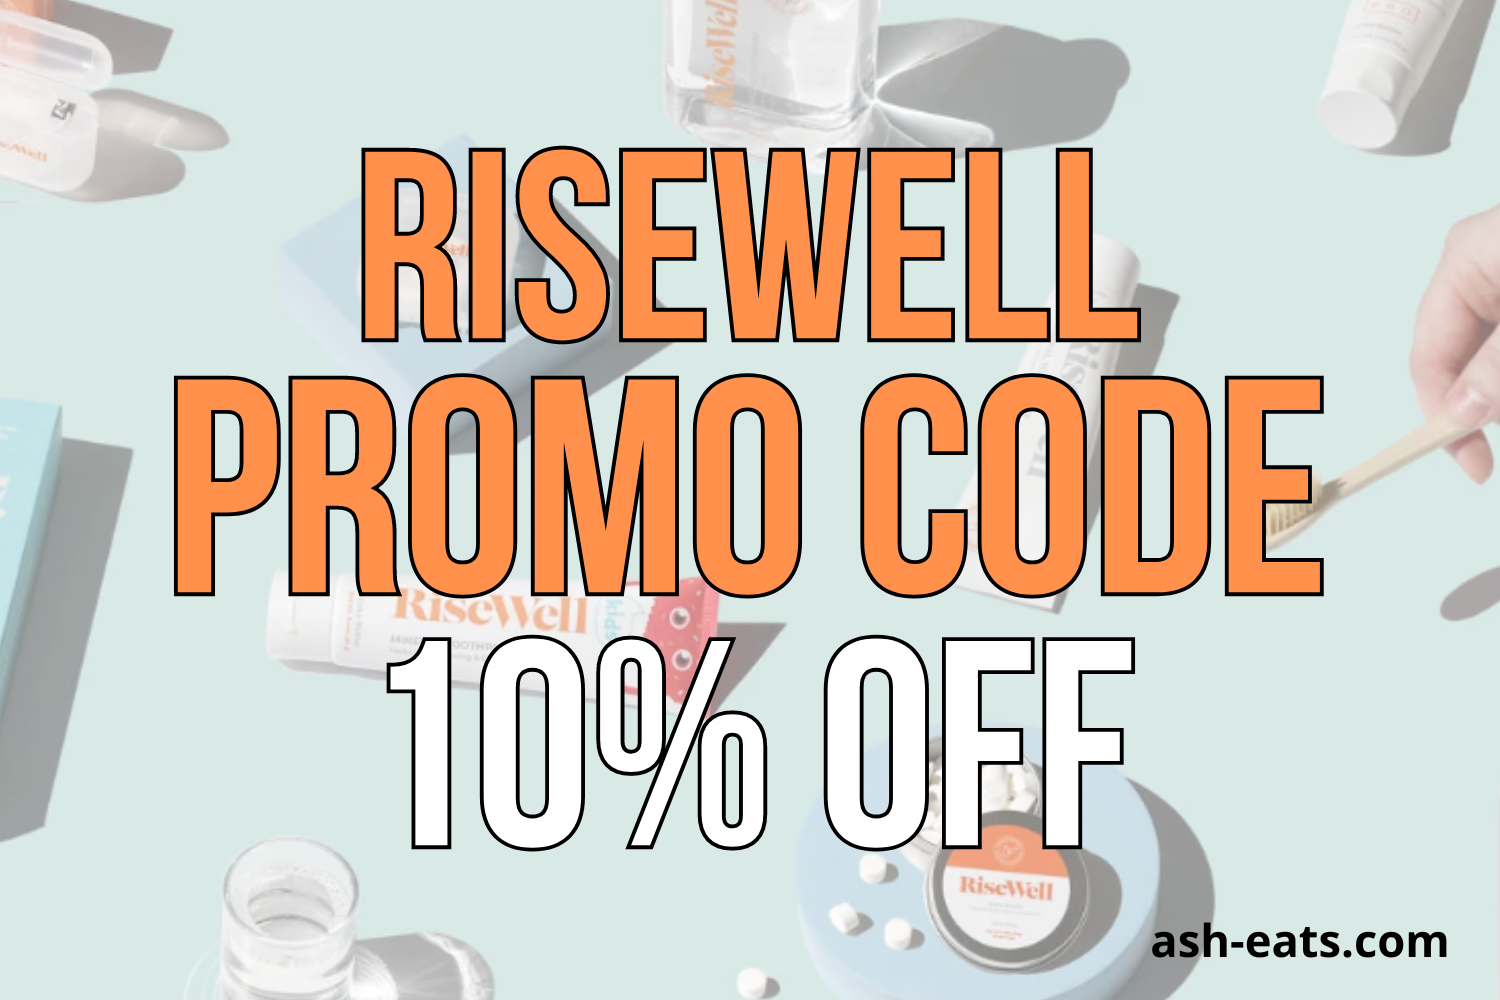 risewell promo code